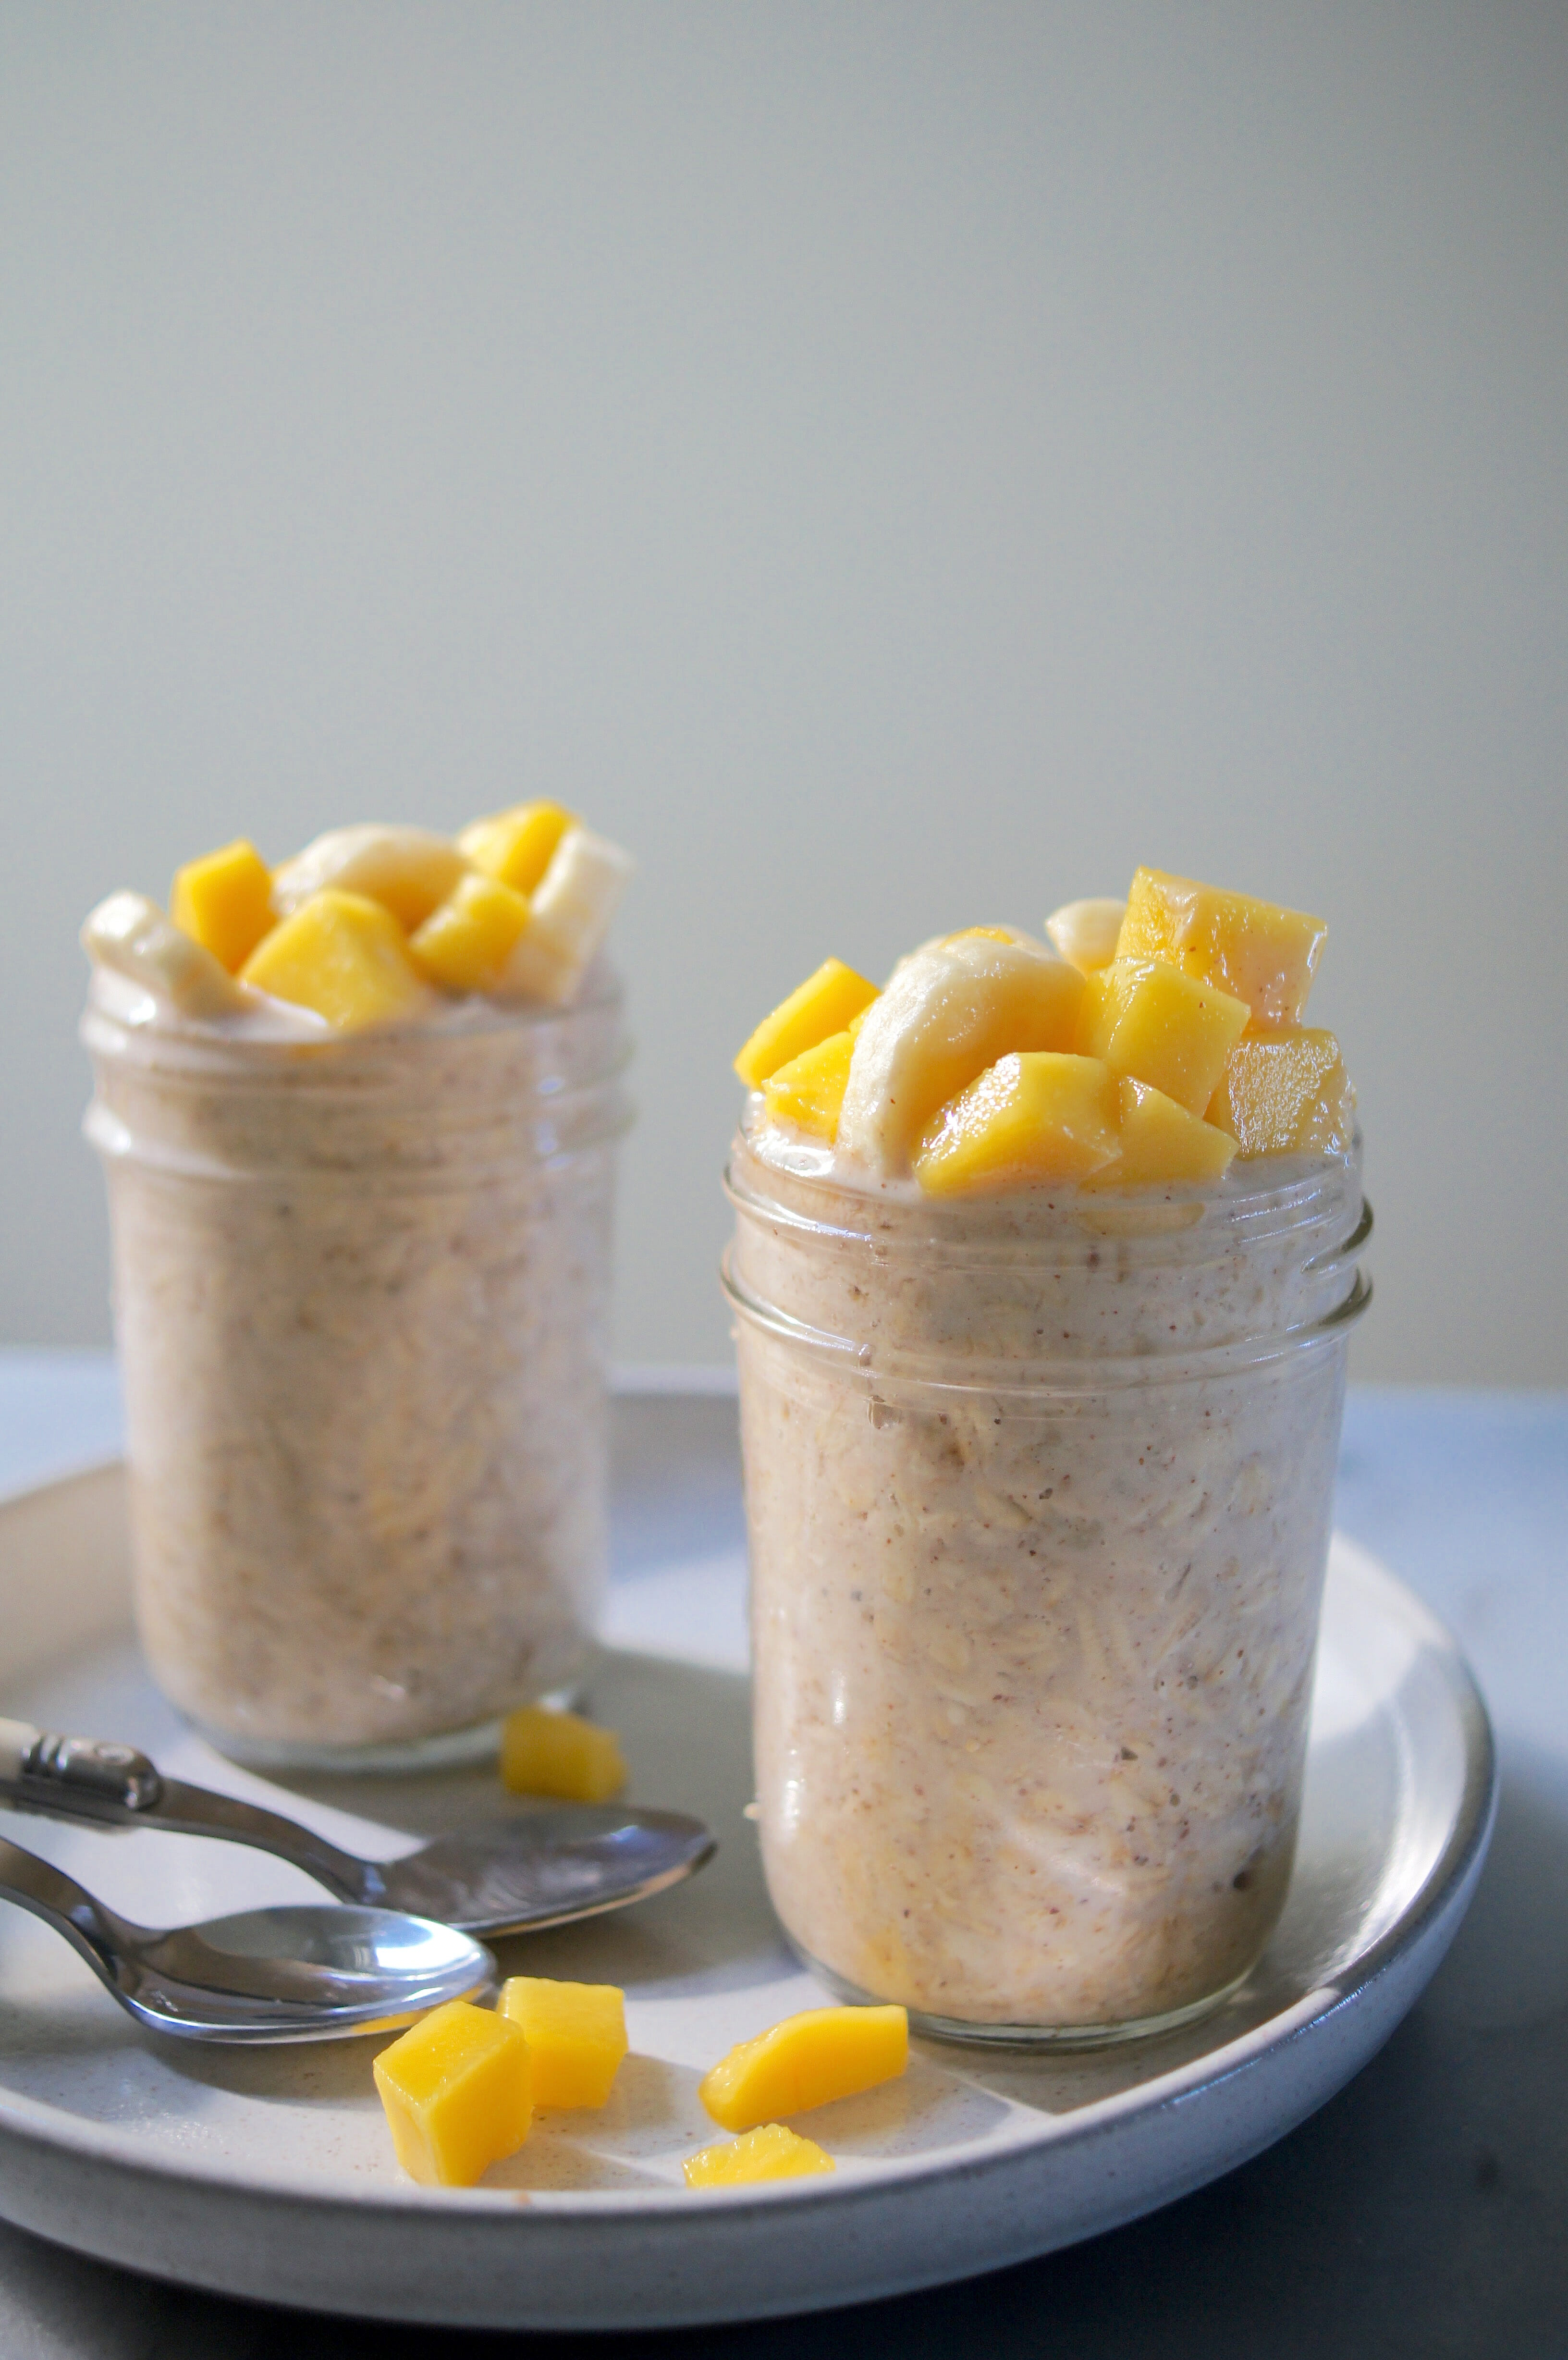 Overnight Oats with Banana and Almond Butter Makes a